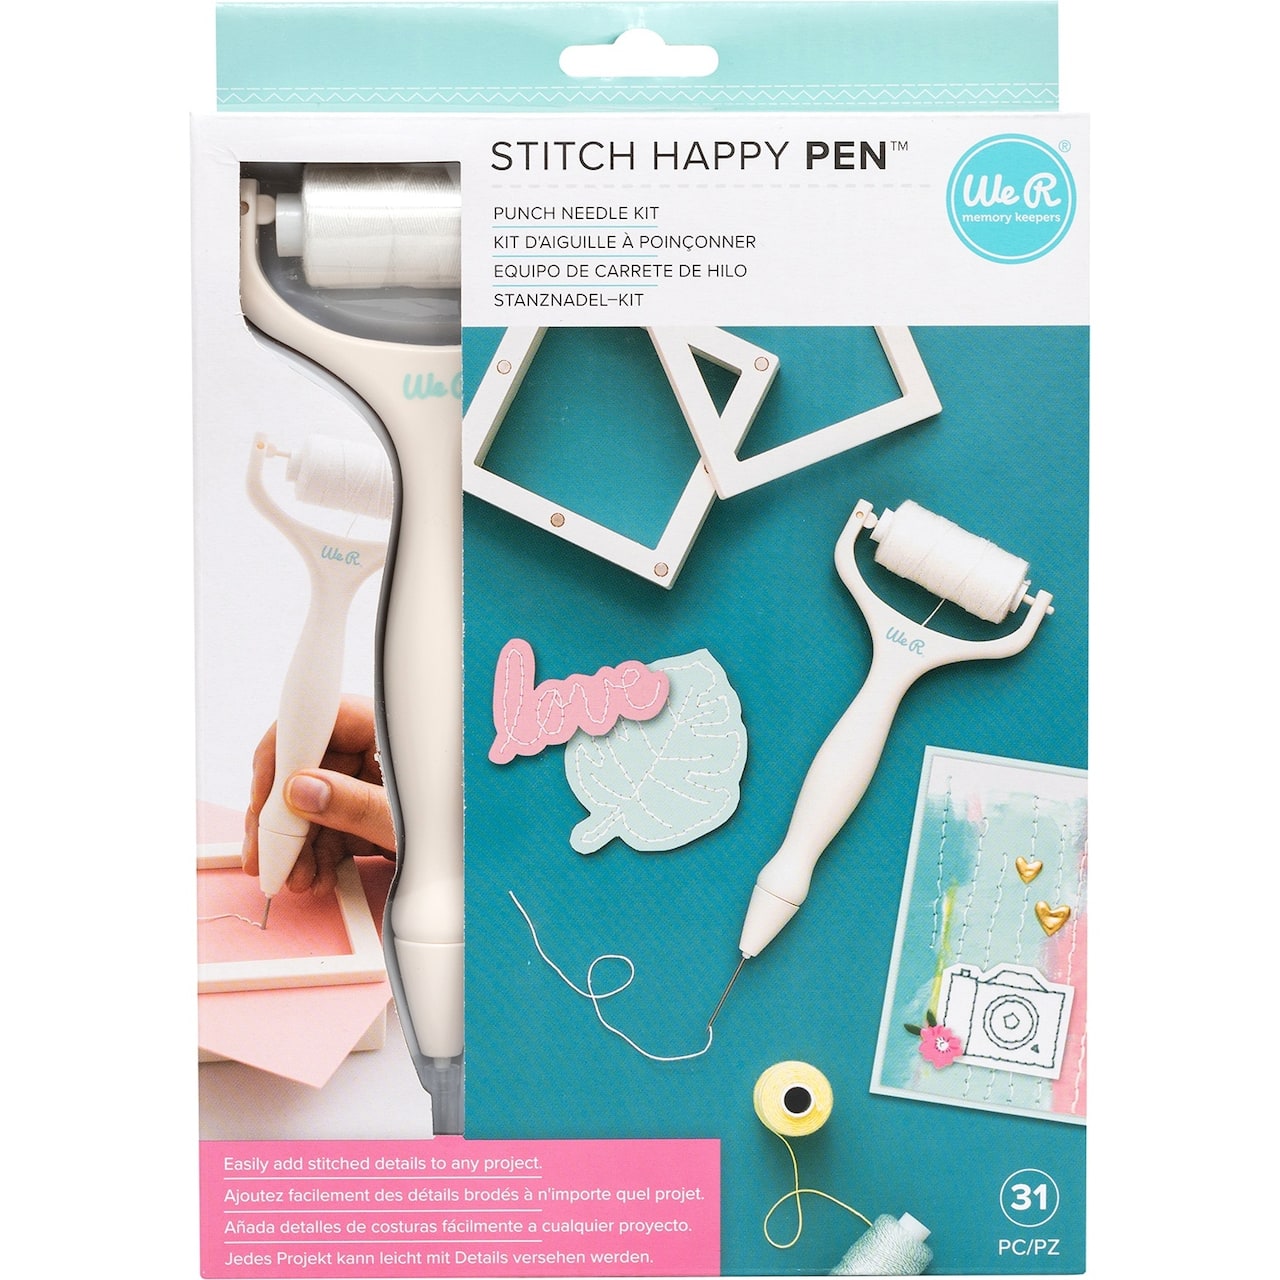 We R Memory Keepers® Stitch Happy Pen™ Punch Needle Kit